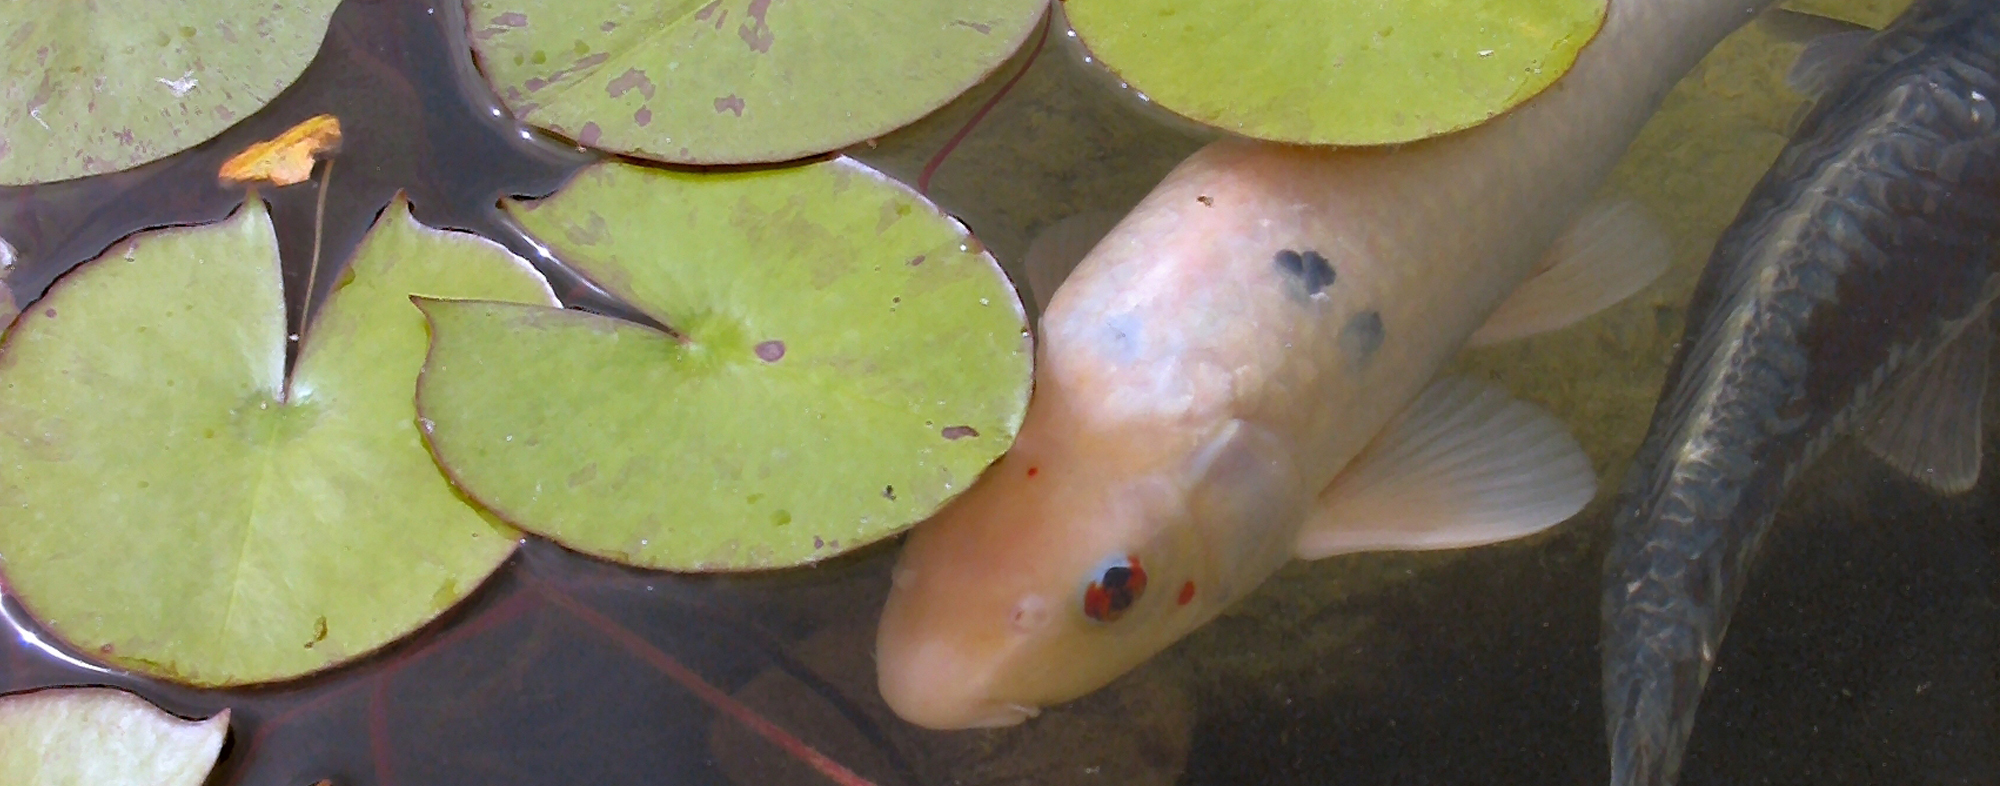 Outbreak of algae bloom in a pond, diverting oxygen from pet fish